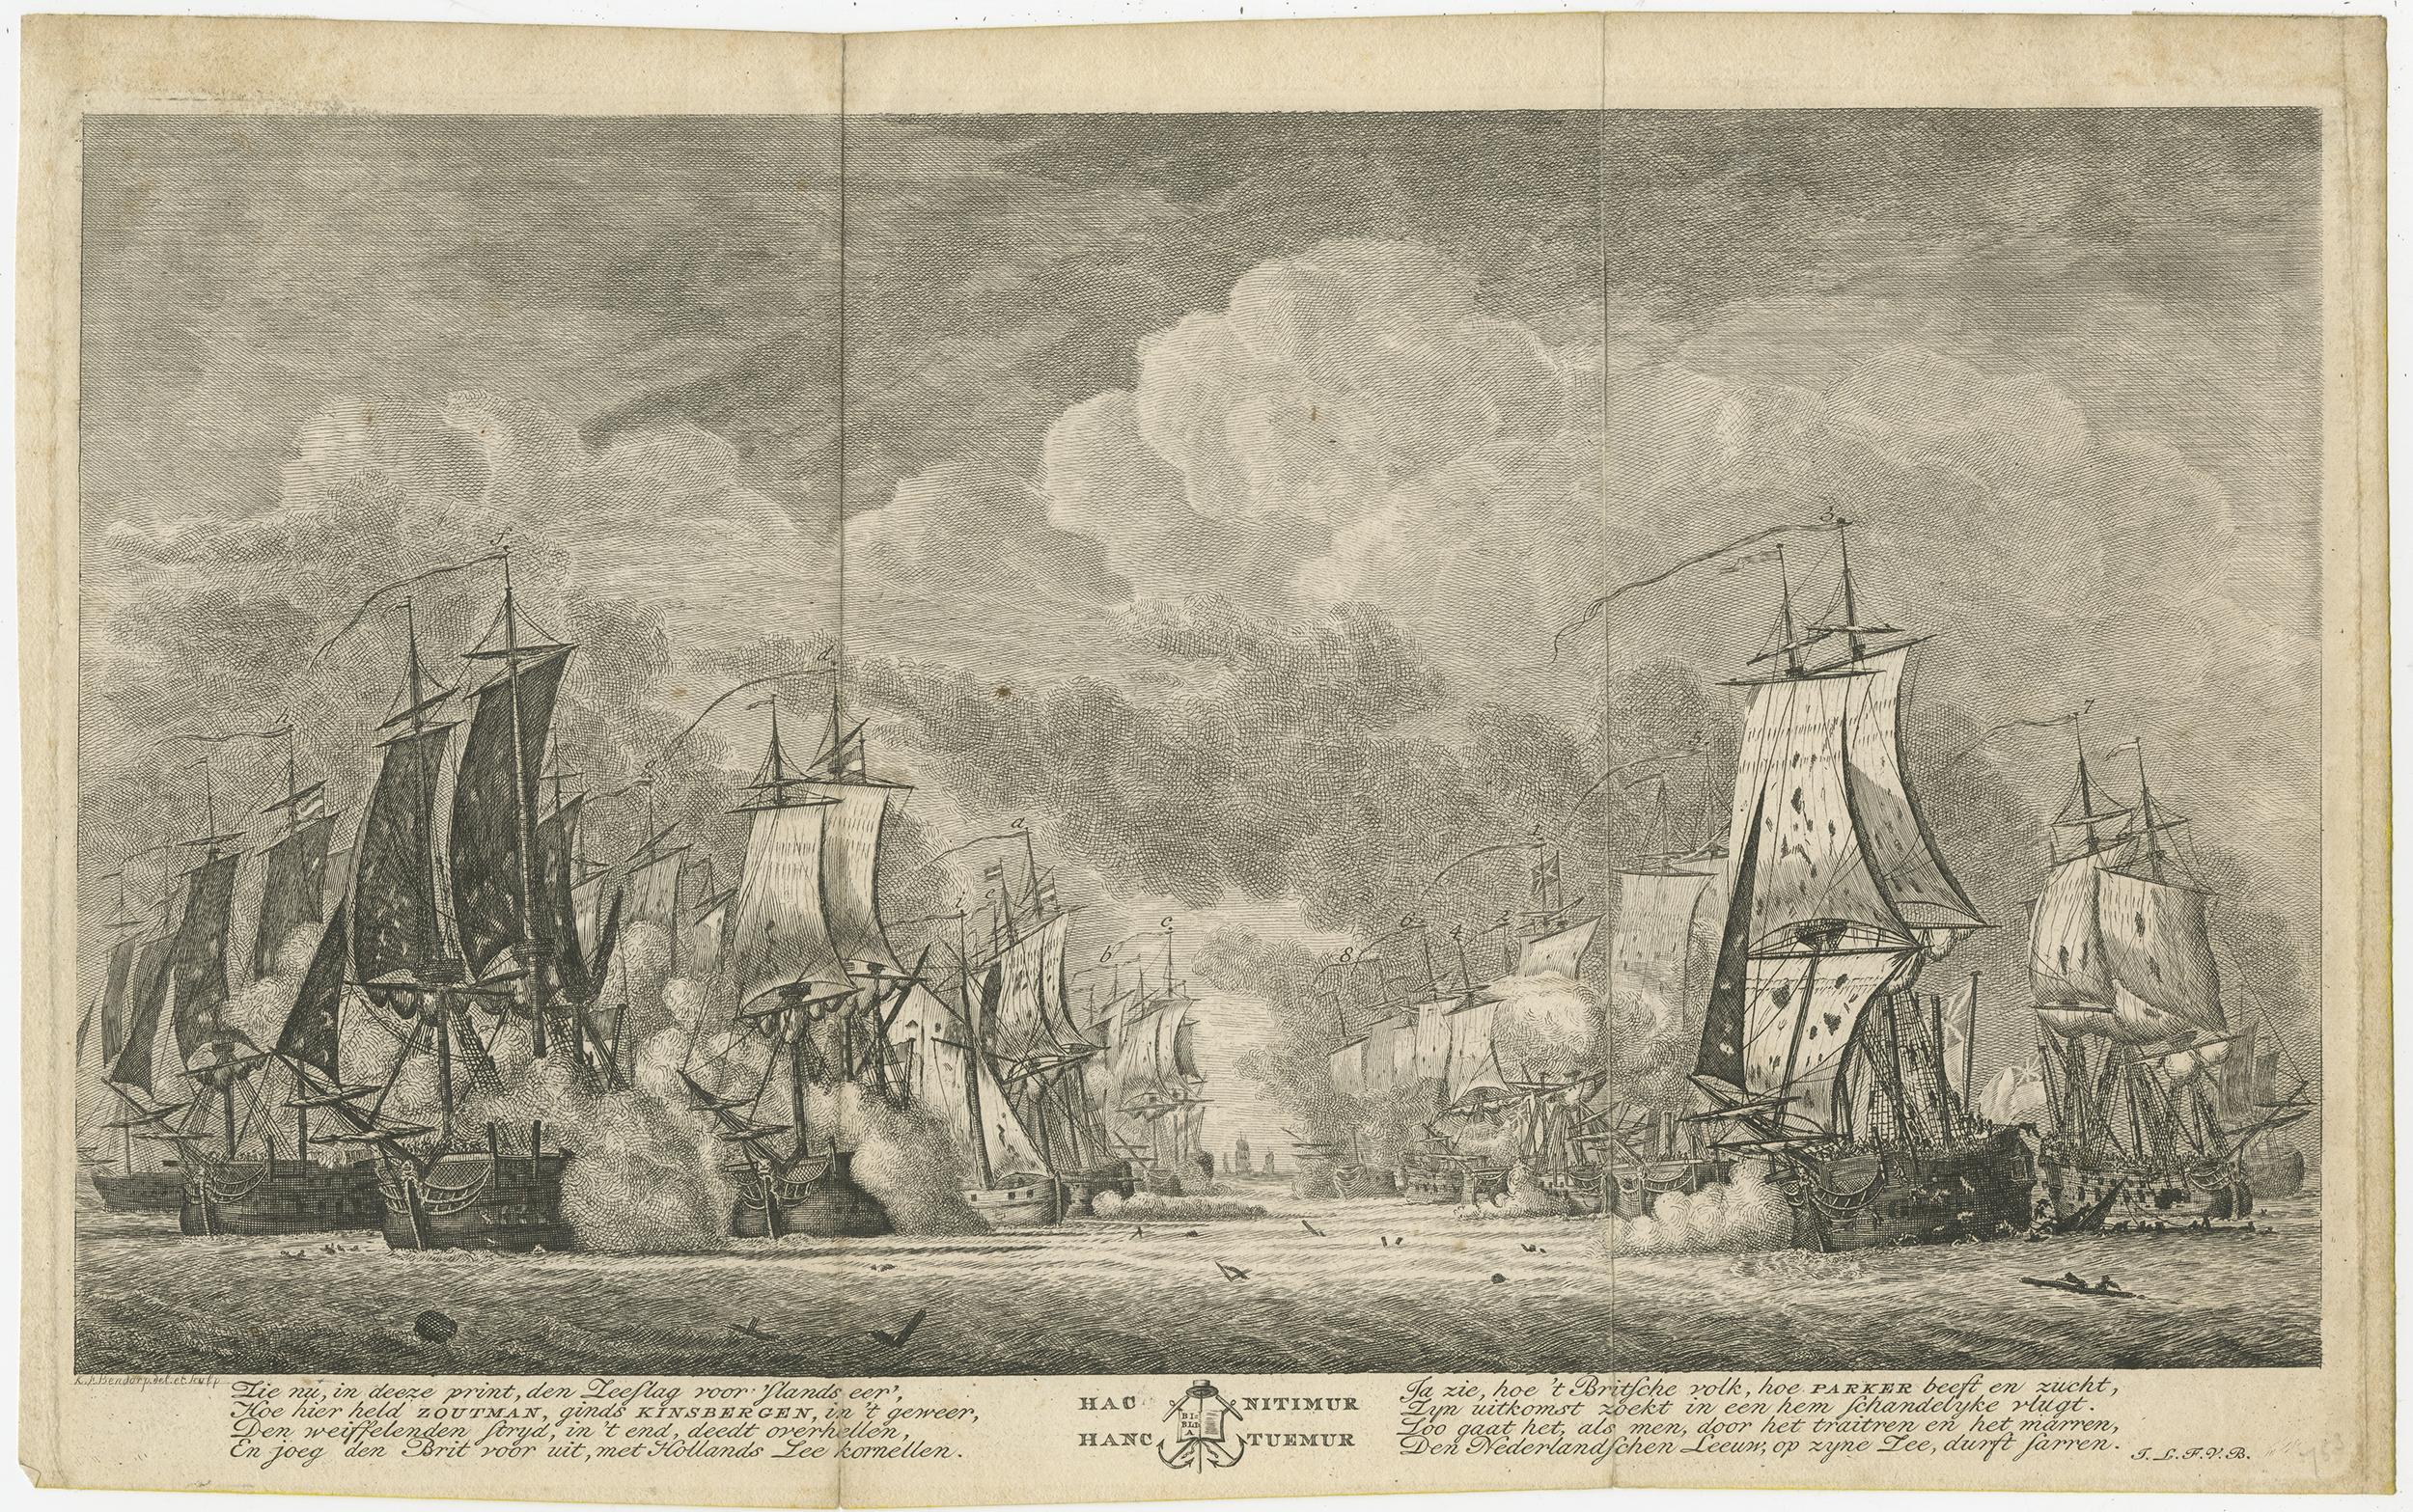 Antique print titled 'Hac Nitimur - Hanc Tuemur'. 

Original antique print with a scene of the Battle of Dogger Bank. The Battle of Dogger Bank was a naval battle that took place on 5 August 1781 during the Fourth Anglo-Dutch War,